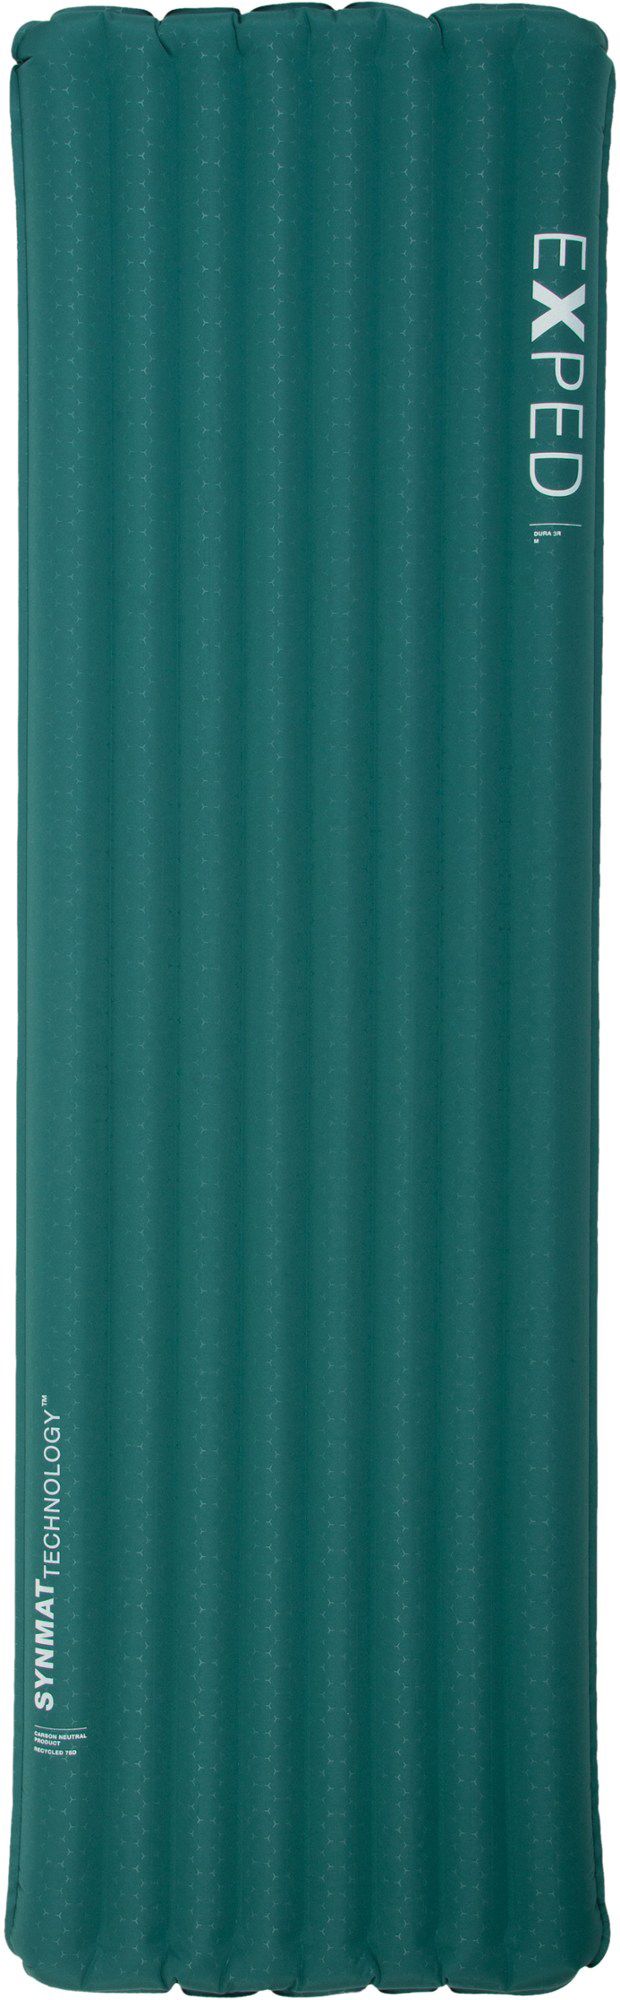 Photos - Bed Linen Exped Dura 3R Insulated Sleeping Pad, LW, Cypress 23RSAUDR3RLWXXXXXCSL 